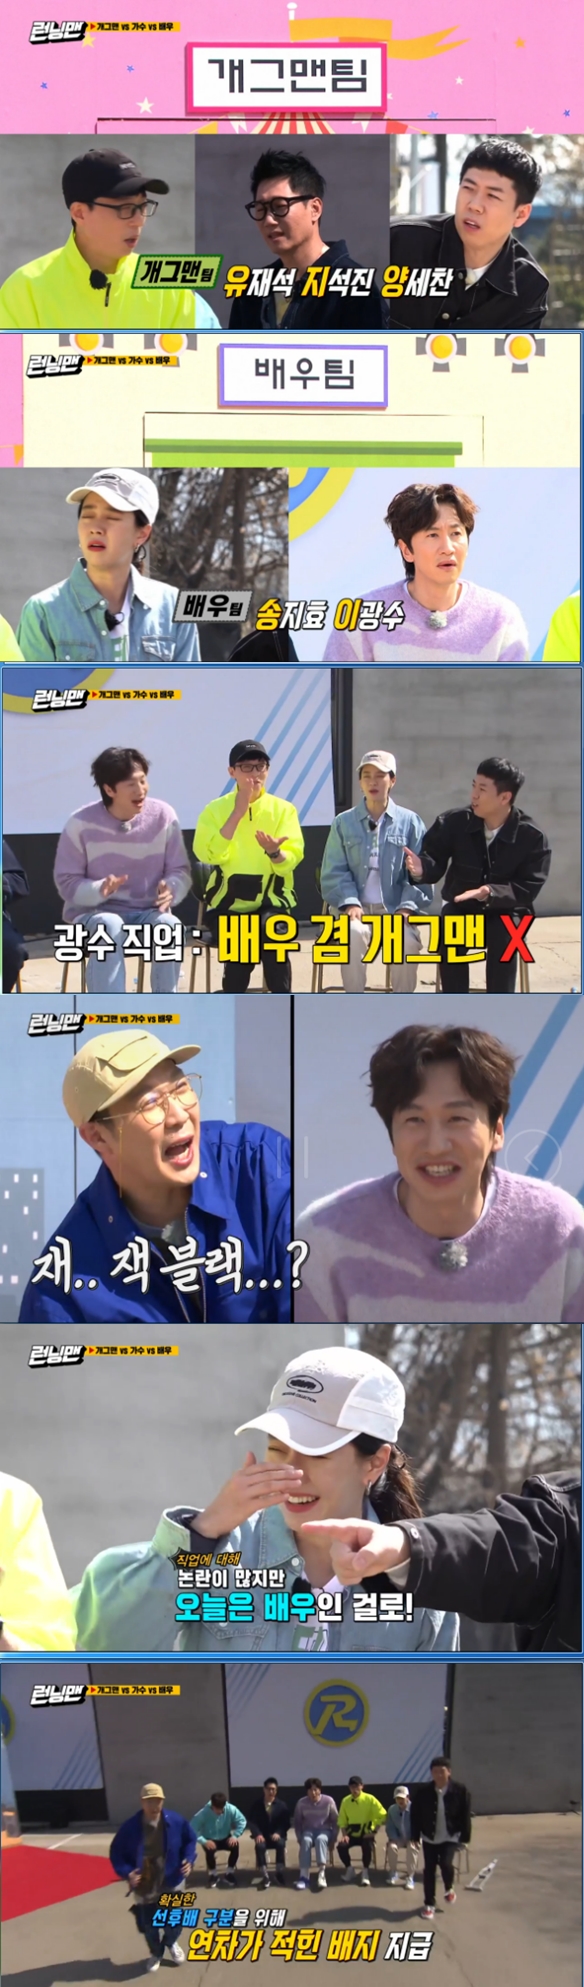 Lee Kwang-soo has the confusion of Identity.In the SBS entertainment program Running Man broadcasted on the 19th, the members were divided into Comedian, singer, and actor team and showed Running Man Clath Race with guests.To the members gathered at the opening, the crew said they would team up with guests, divided into Comedian, singer and actor teams.The Comedian team consisted of Yoo Jae-Suk, Ji Suk-jin and Yang Se-chan.The crew classified Lee Kwang-soo as an Actor team with Song Ji-hyo.Yoo Jae-Suk said, Lee Kwang-soo is ambiguous to go to the Actor team, which made Lee Kwang-soo embarrassed.Yang Se-chan said, It is not Actor and Comedian, it is Comedian and Actor.Haha raised Lee Kwang-soos status, saying, Its Koreas Jack Black.Lee Kwang-soo said, I am grateful for those words, but I will be an actor team today.